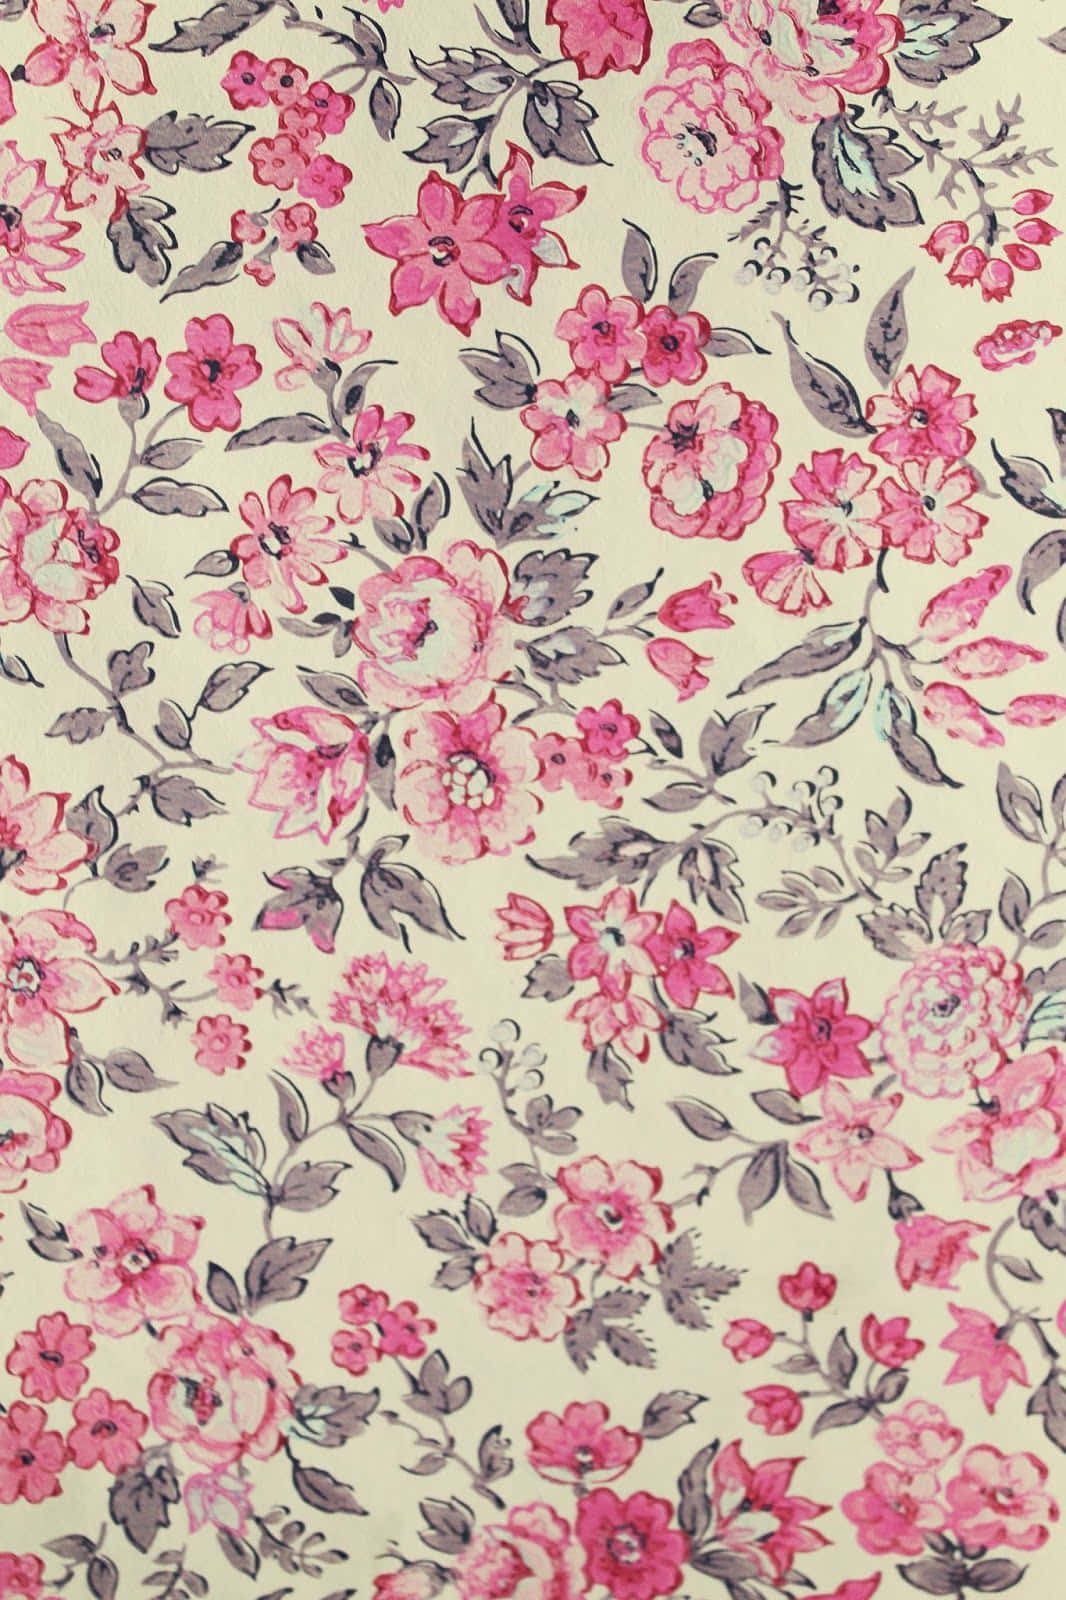 A Pink Floral Fabric With Grey And Black Flowers